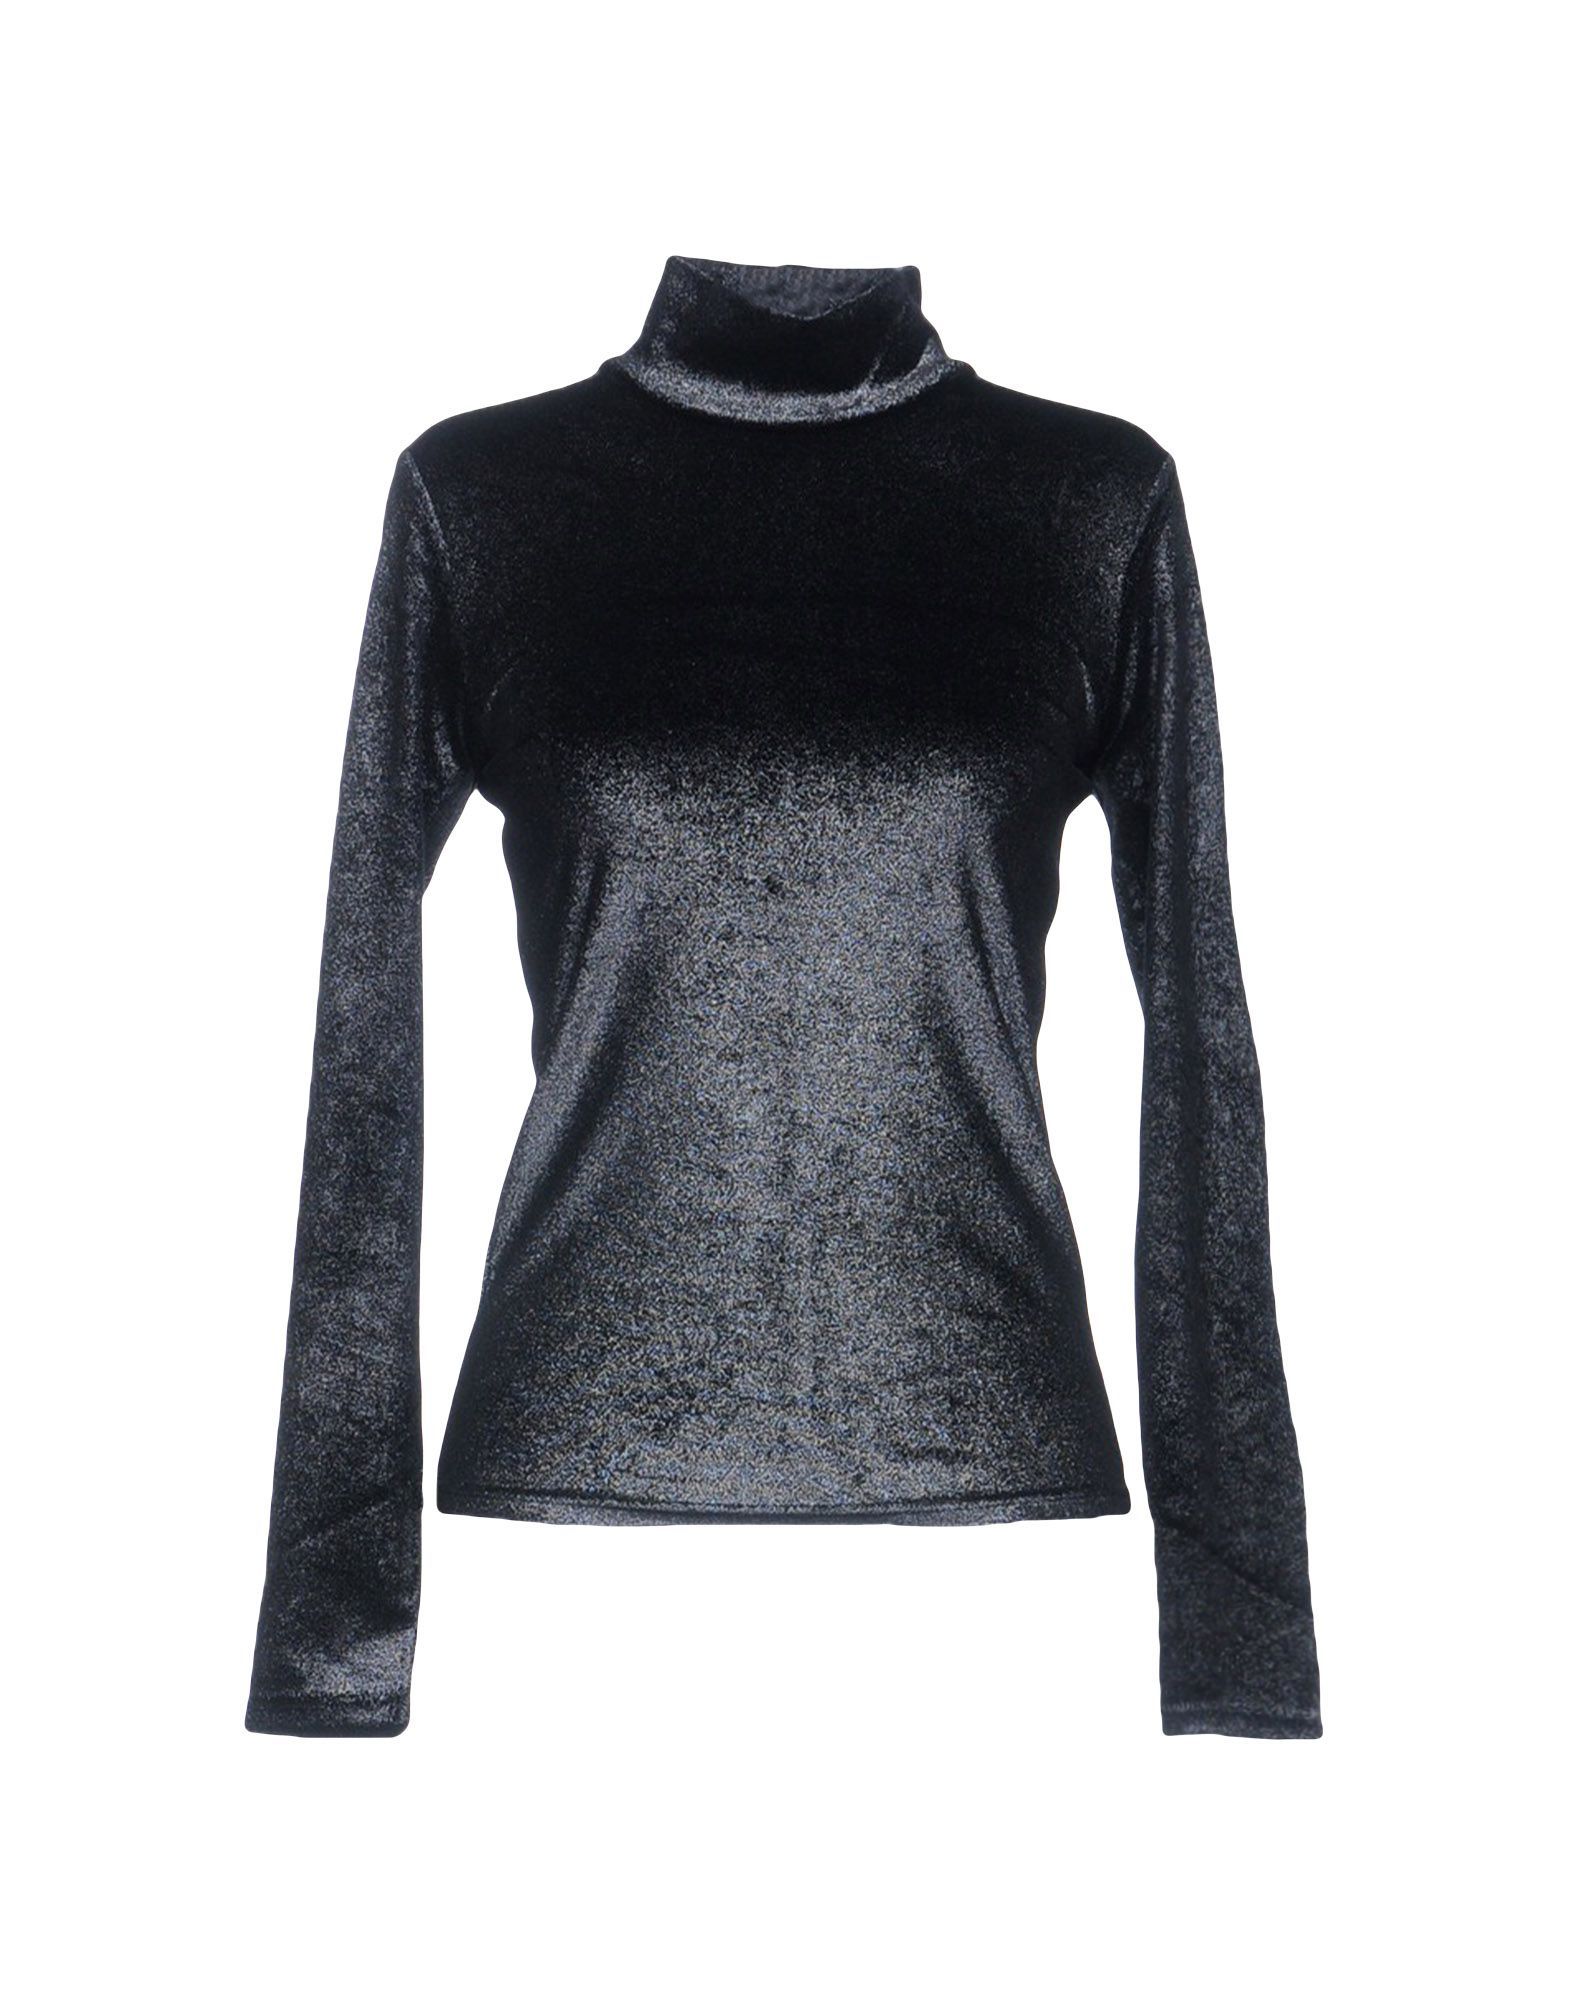 chenille, laminated effect, turtleneck, rear closure, no pockets, long sleeves, solid colour, zip, no appliqu�s, stretch